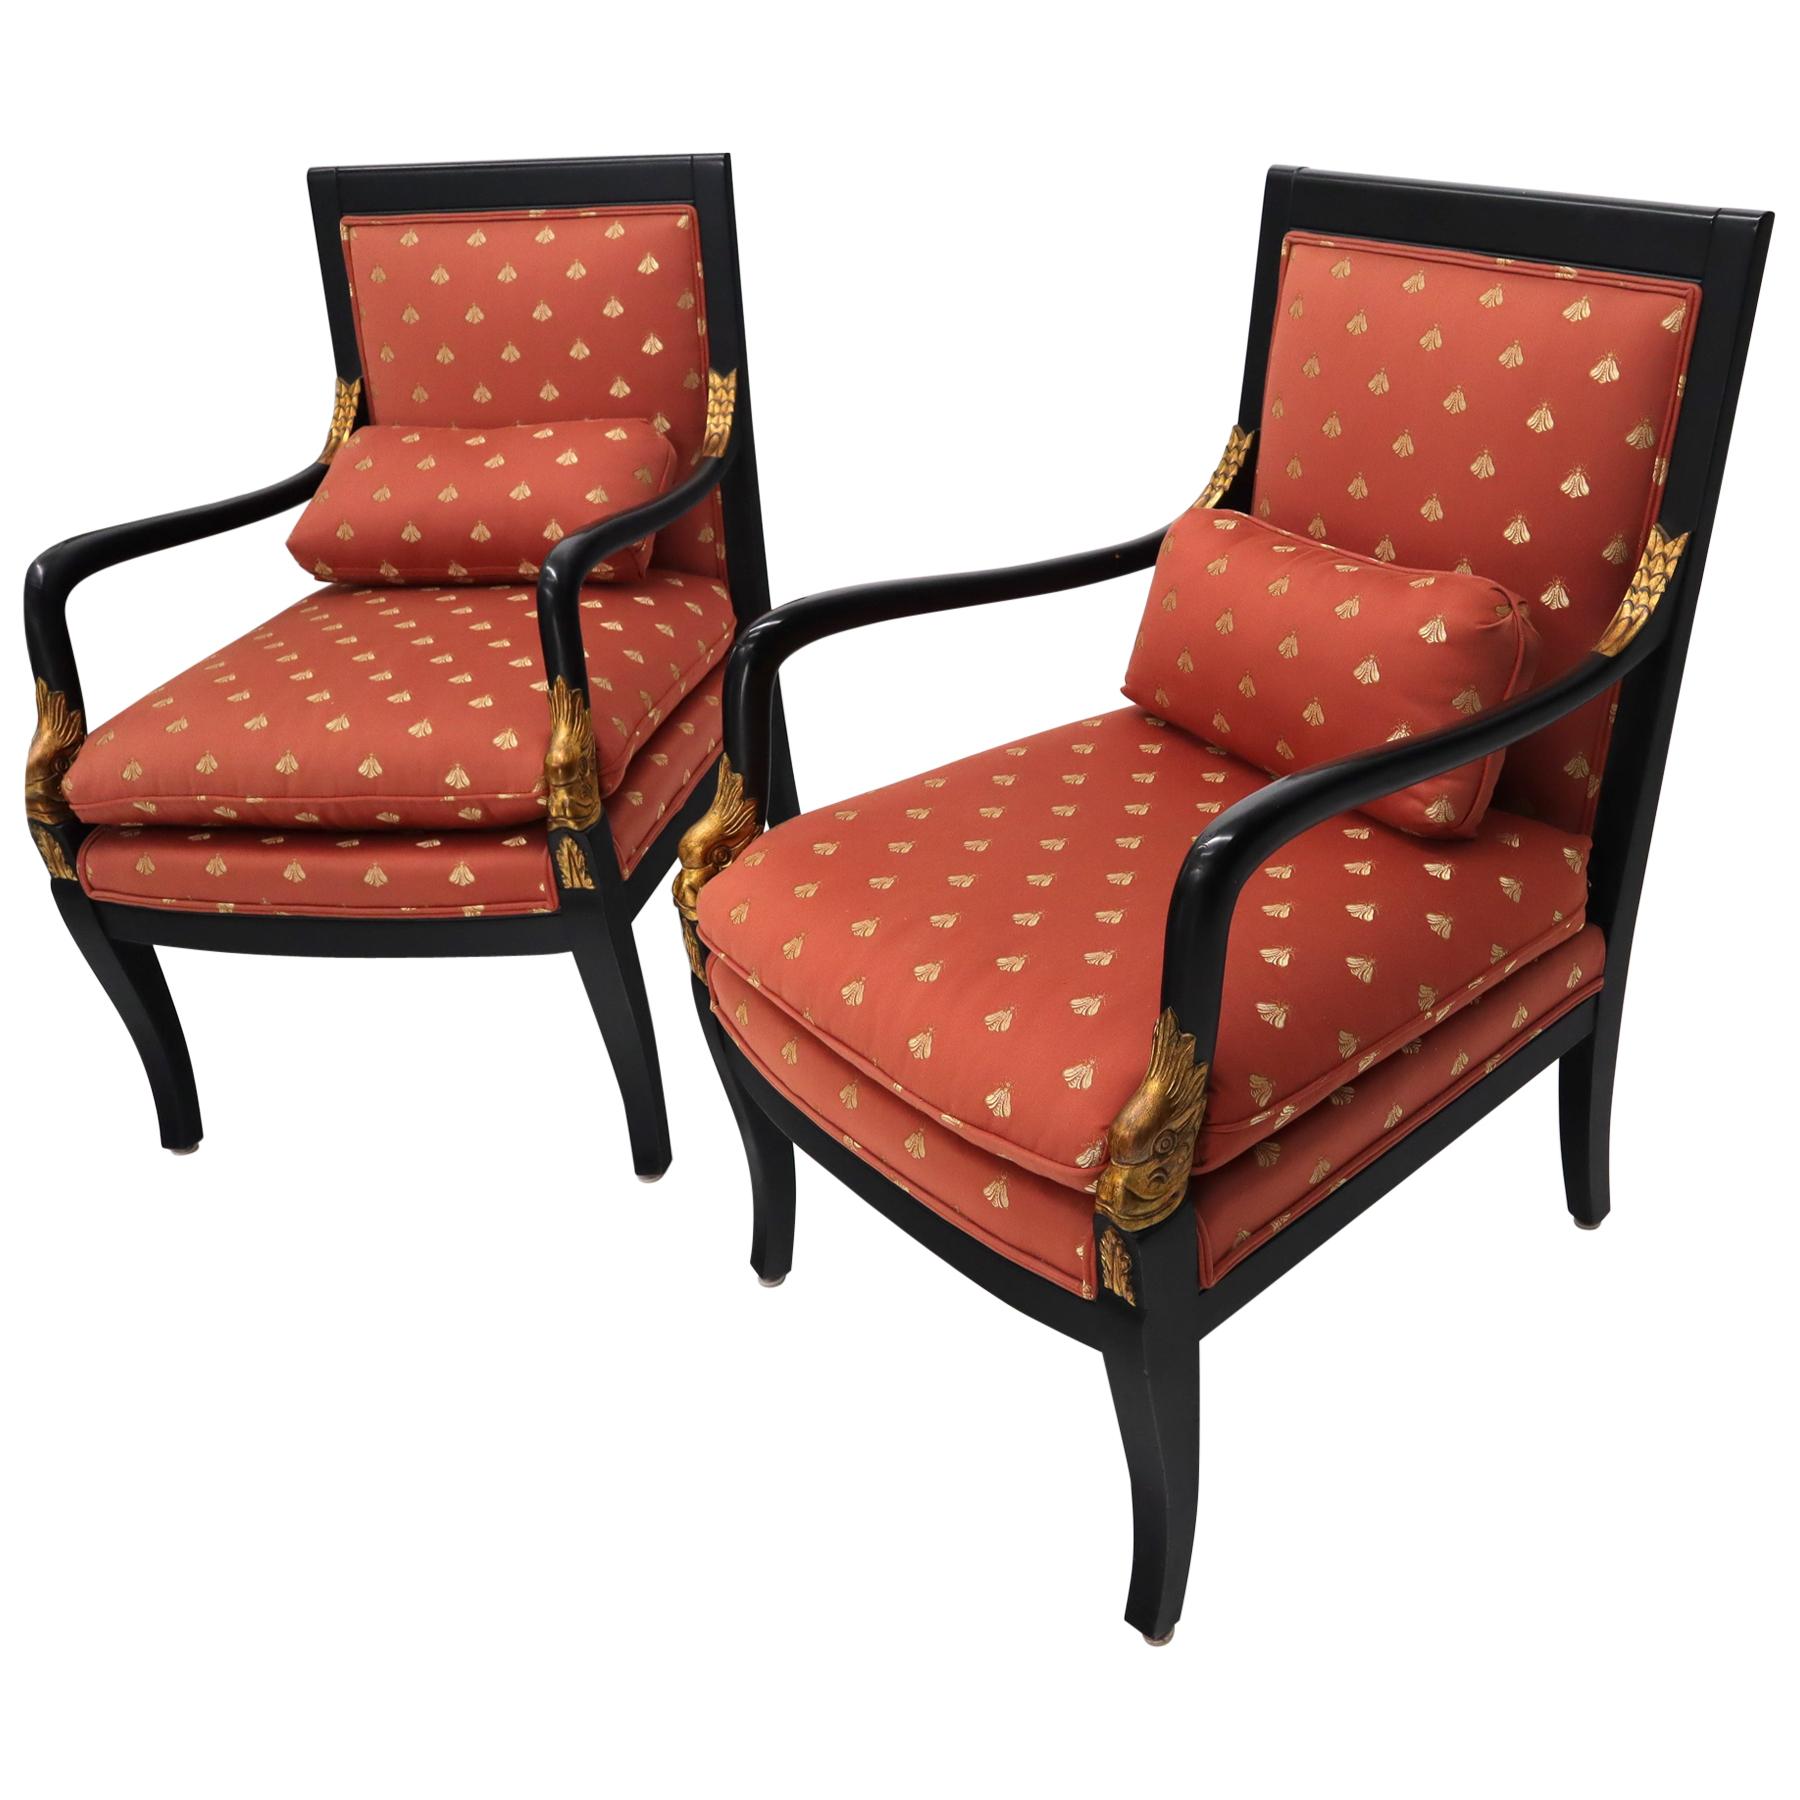 Pair of Ebonized Gold Decorated Carving Frames Neoclassical Armchairs For Sale